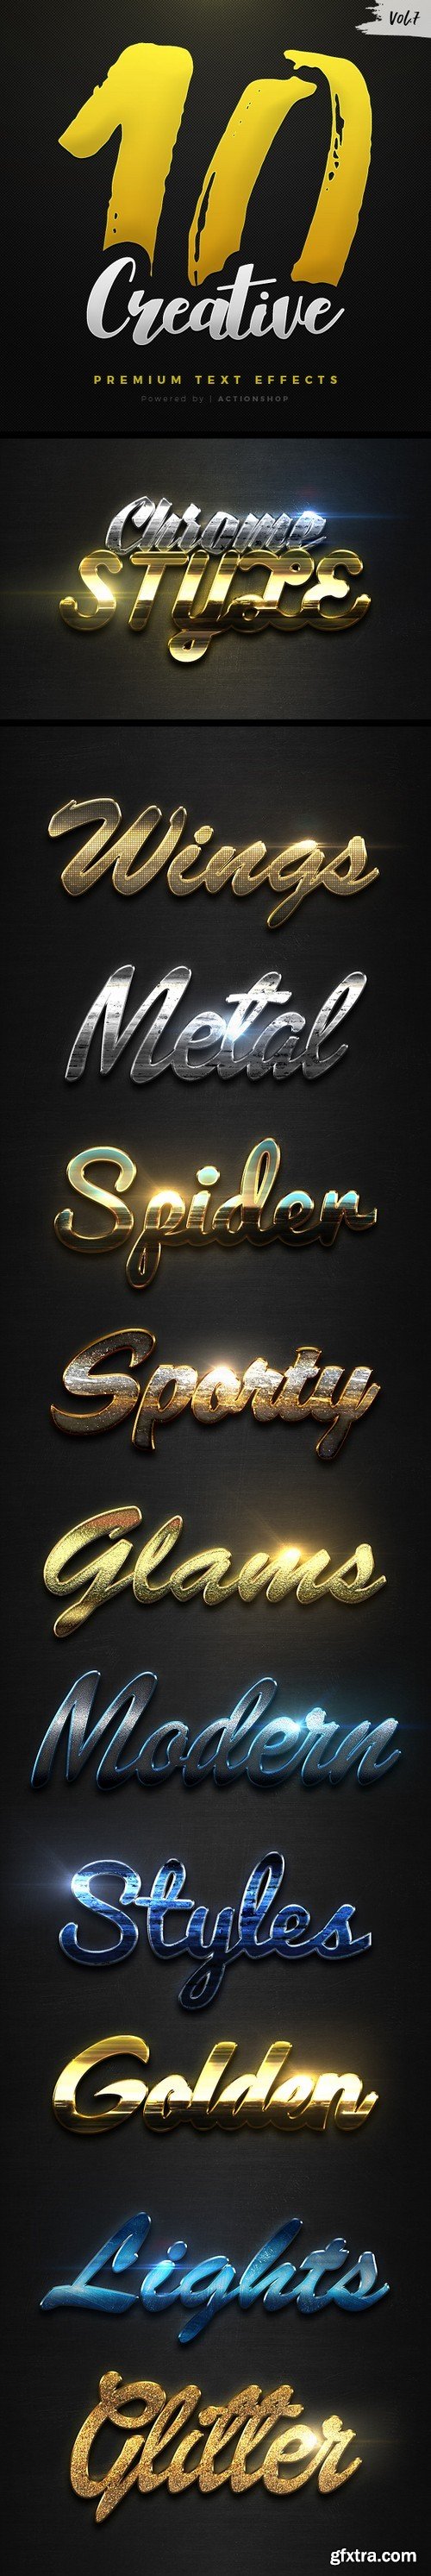 Graphicriver - 10 Creative Text Effects Vol.7 21096707